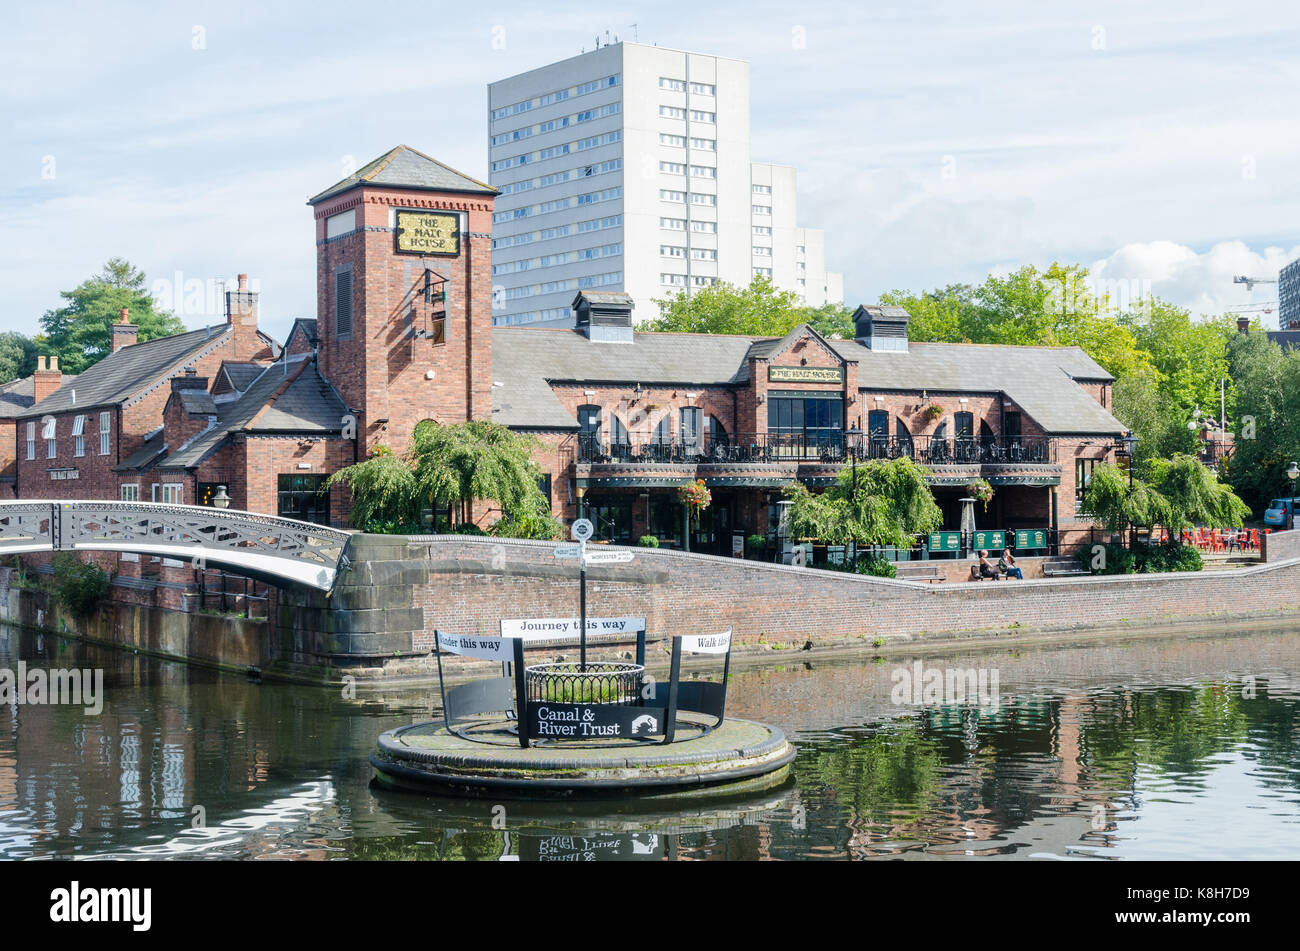 The Malt House canal side pub in Brindley Place, Birmingham Stock Photo